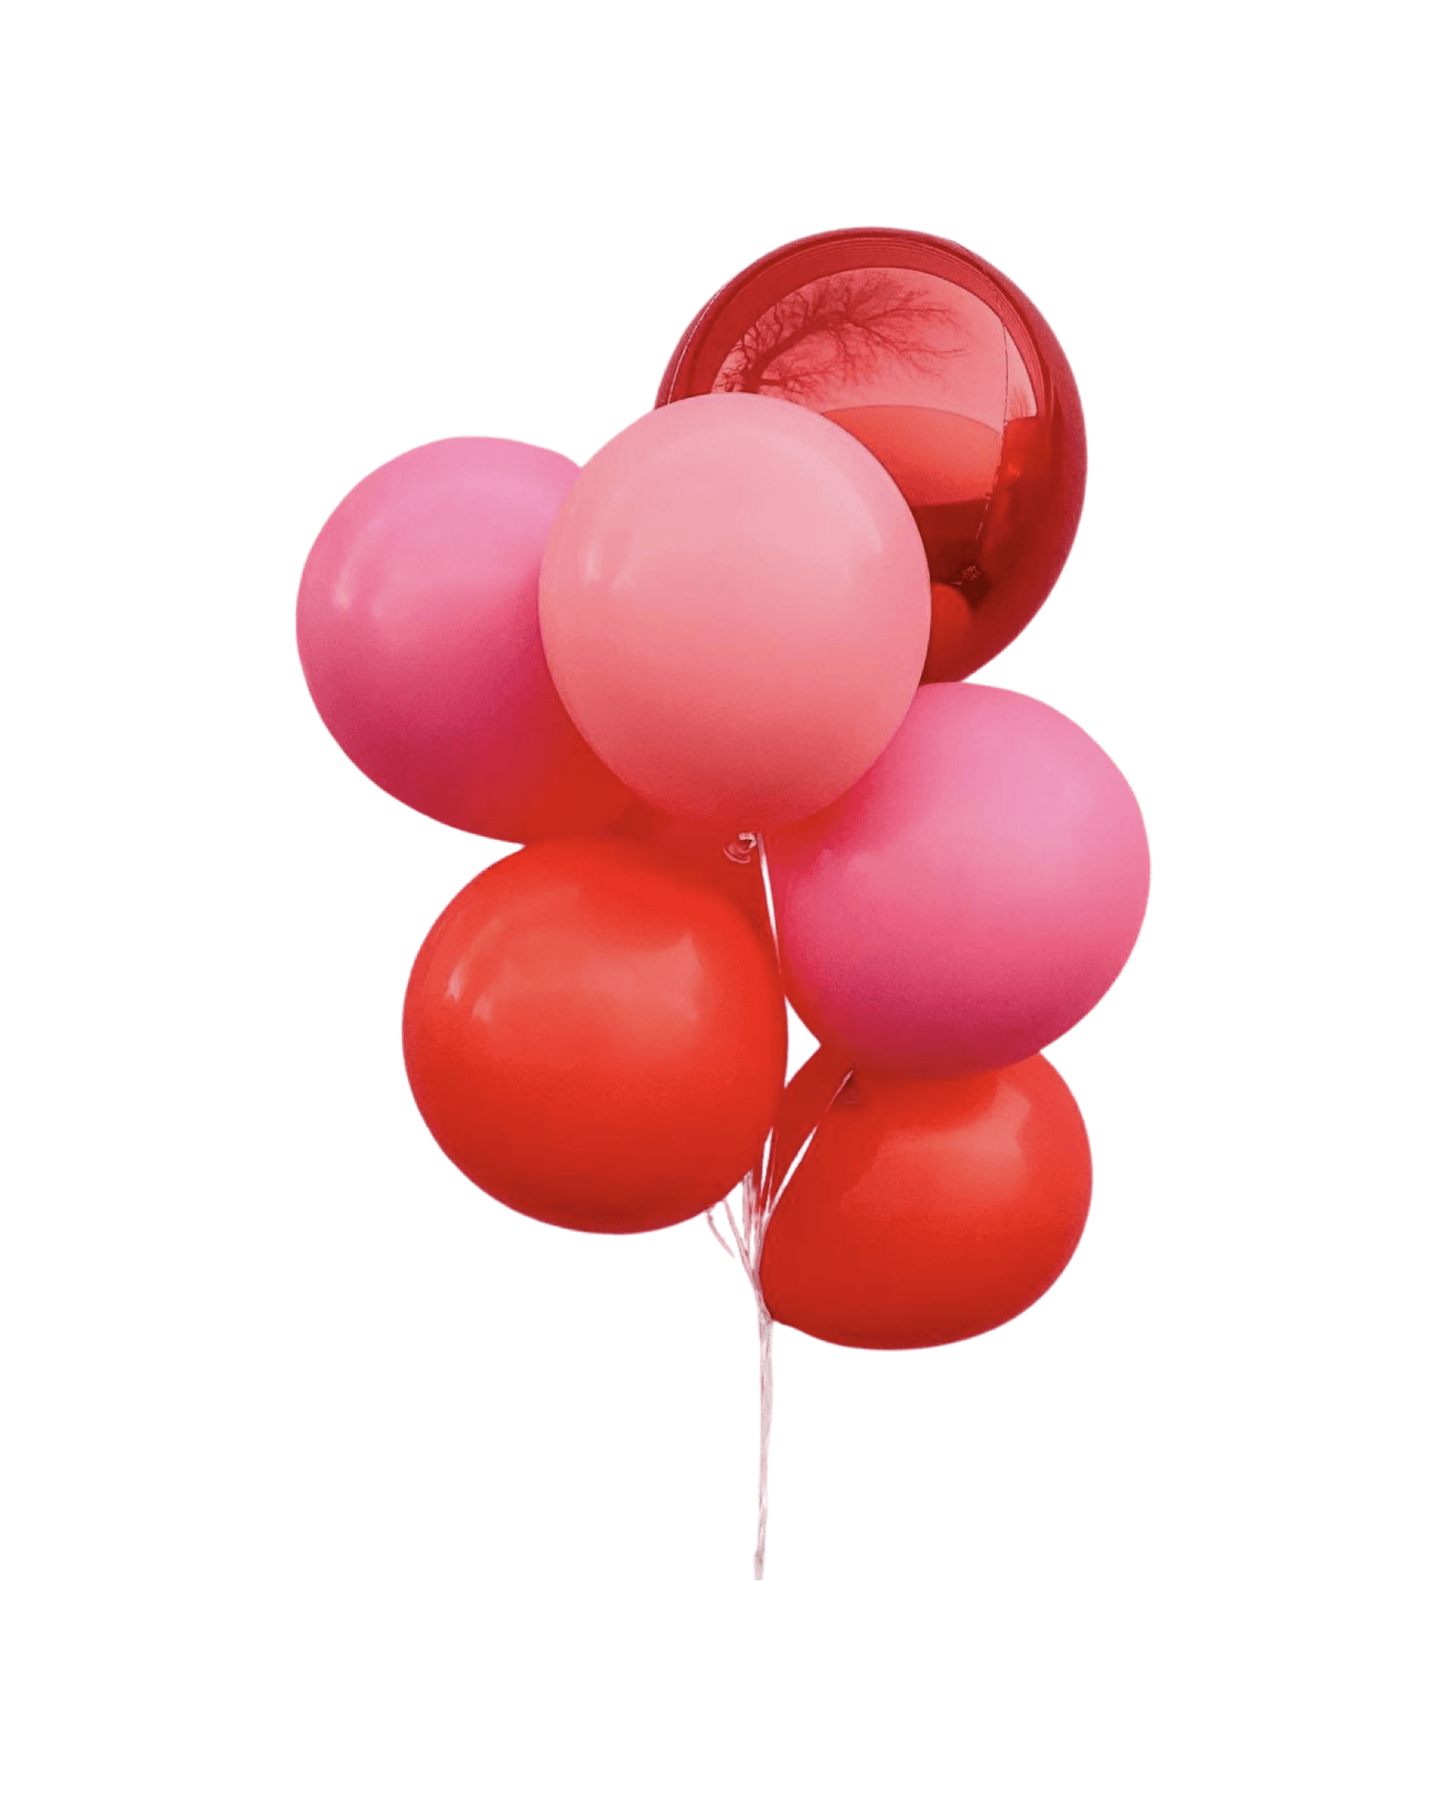 For my BAE bouquet - ONE UP BALLOONS